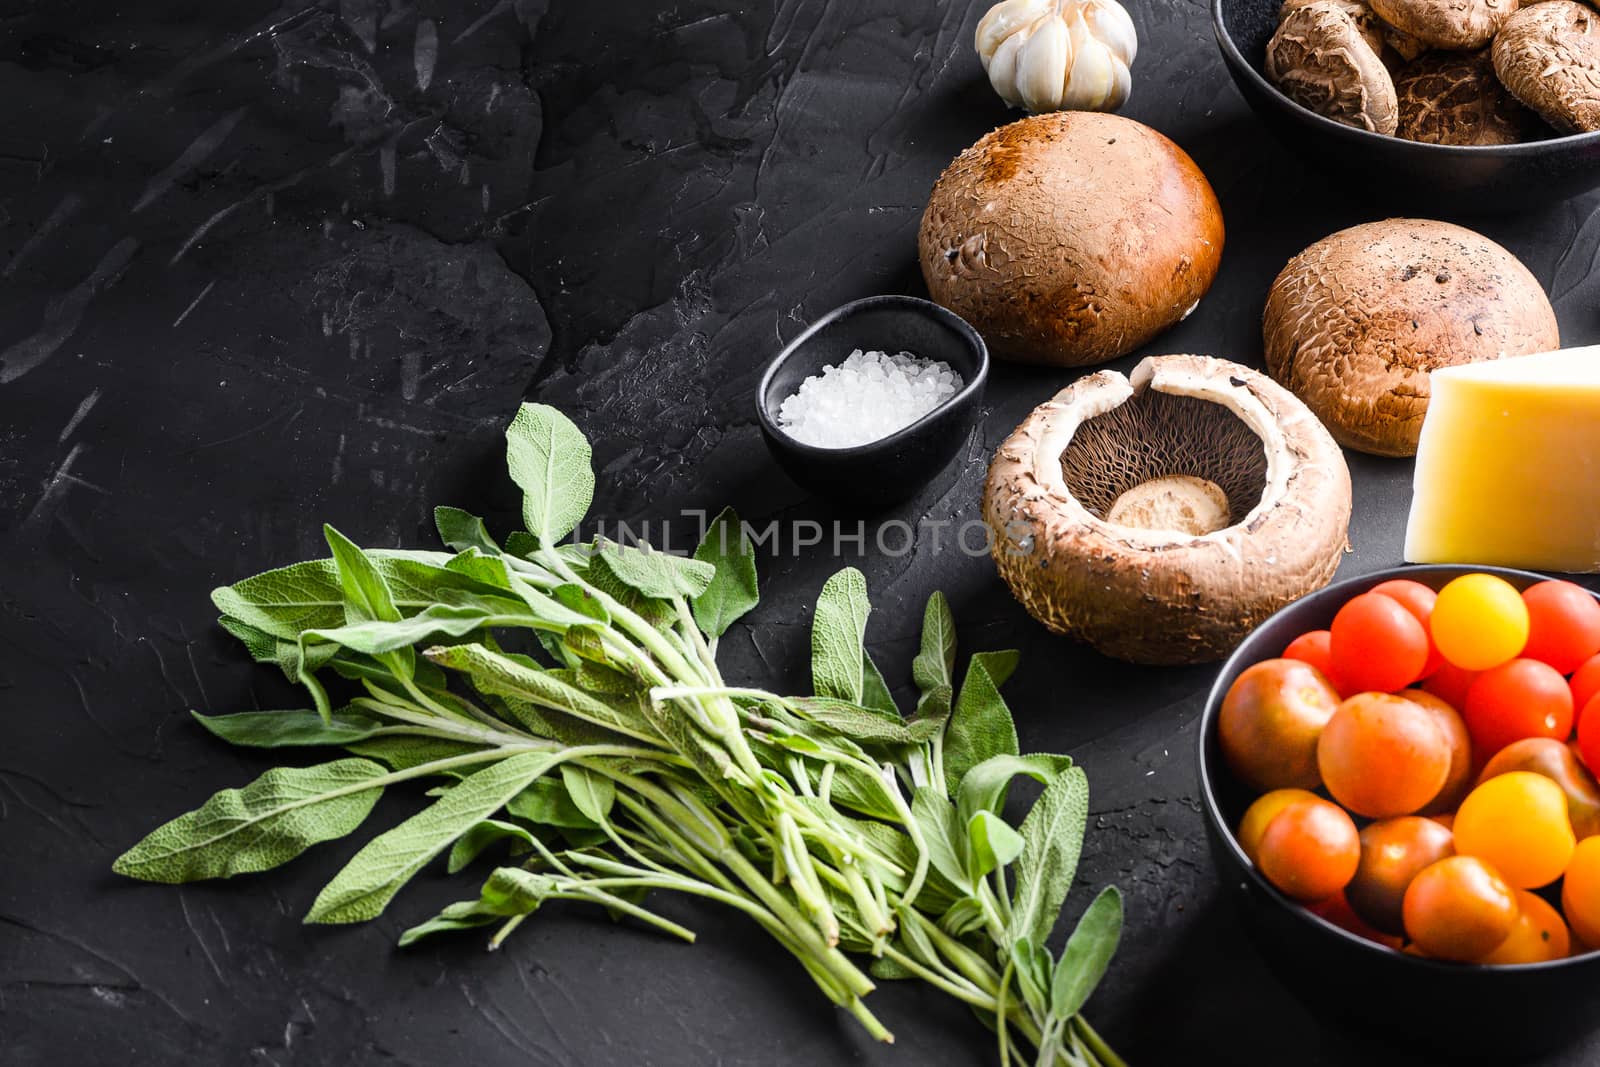 Portabello mushrooms ingredients for baking, cheddar cheese and sage on black background. Side view by Ilianesolenyi